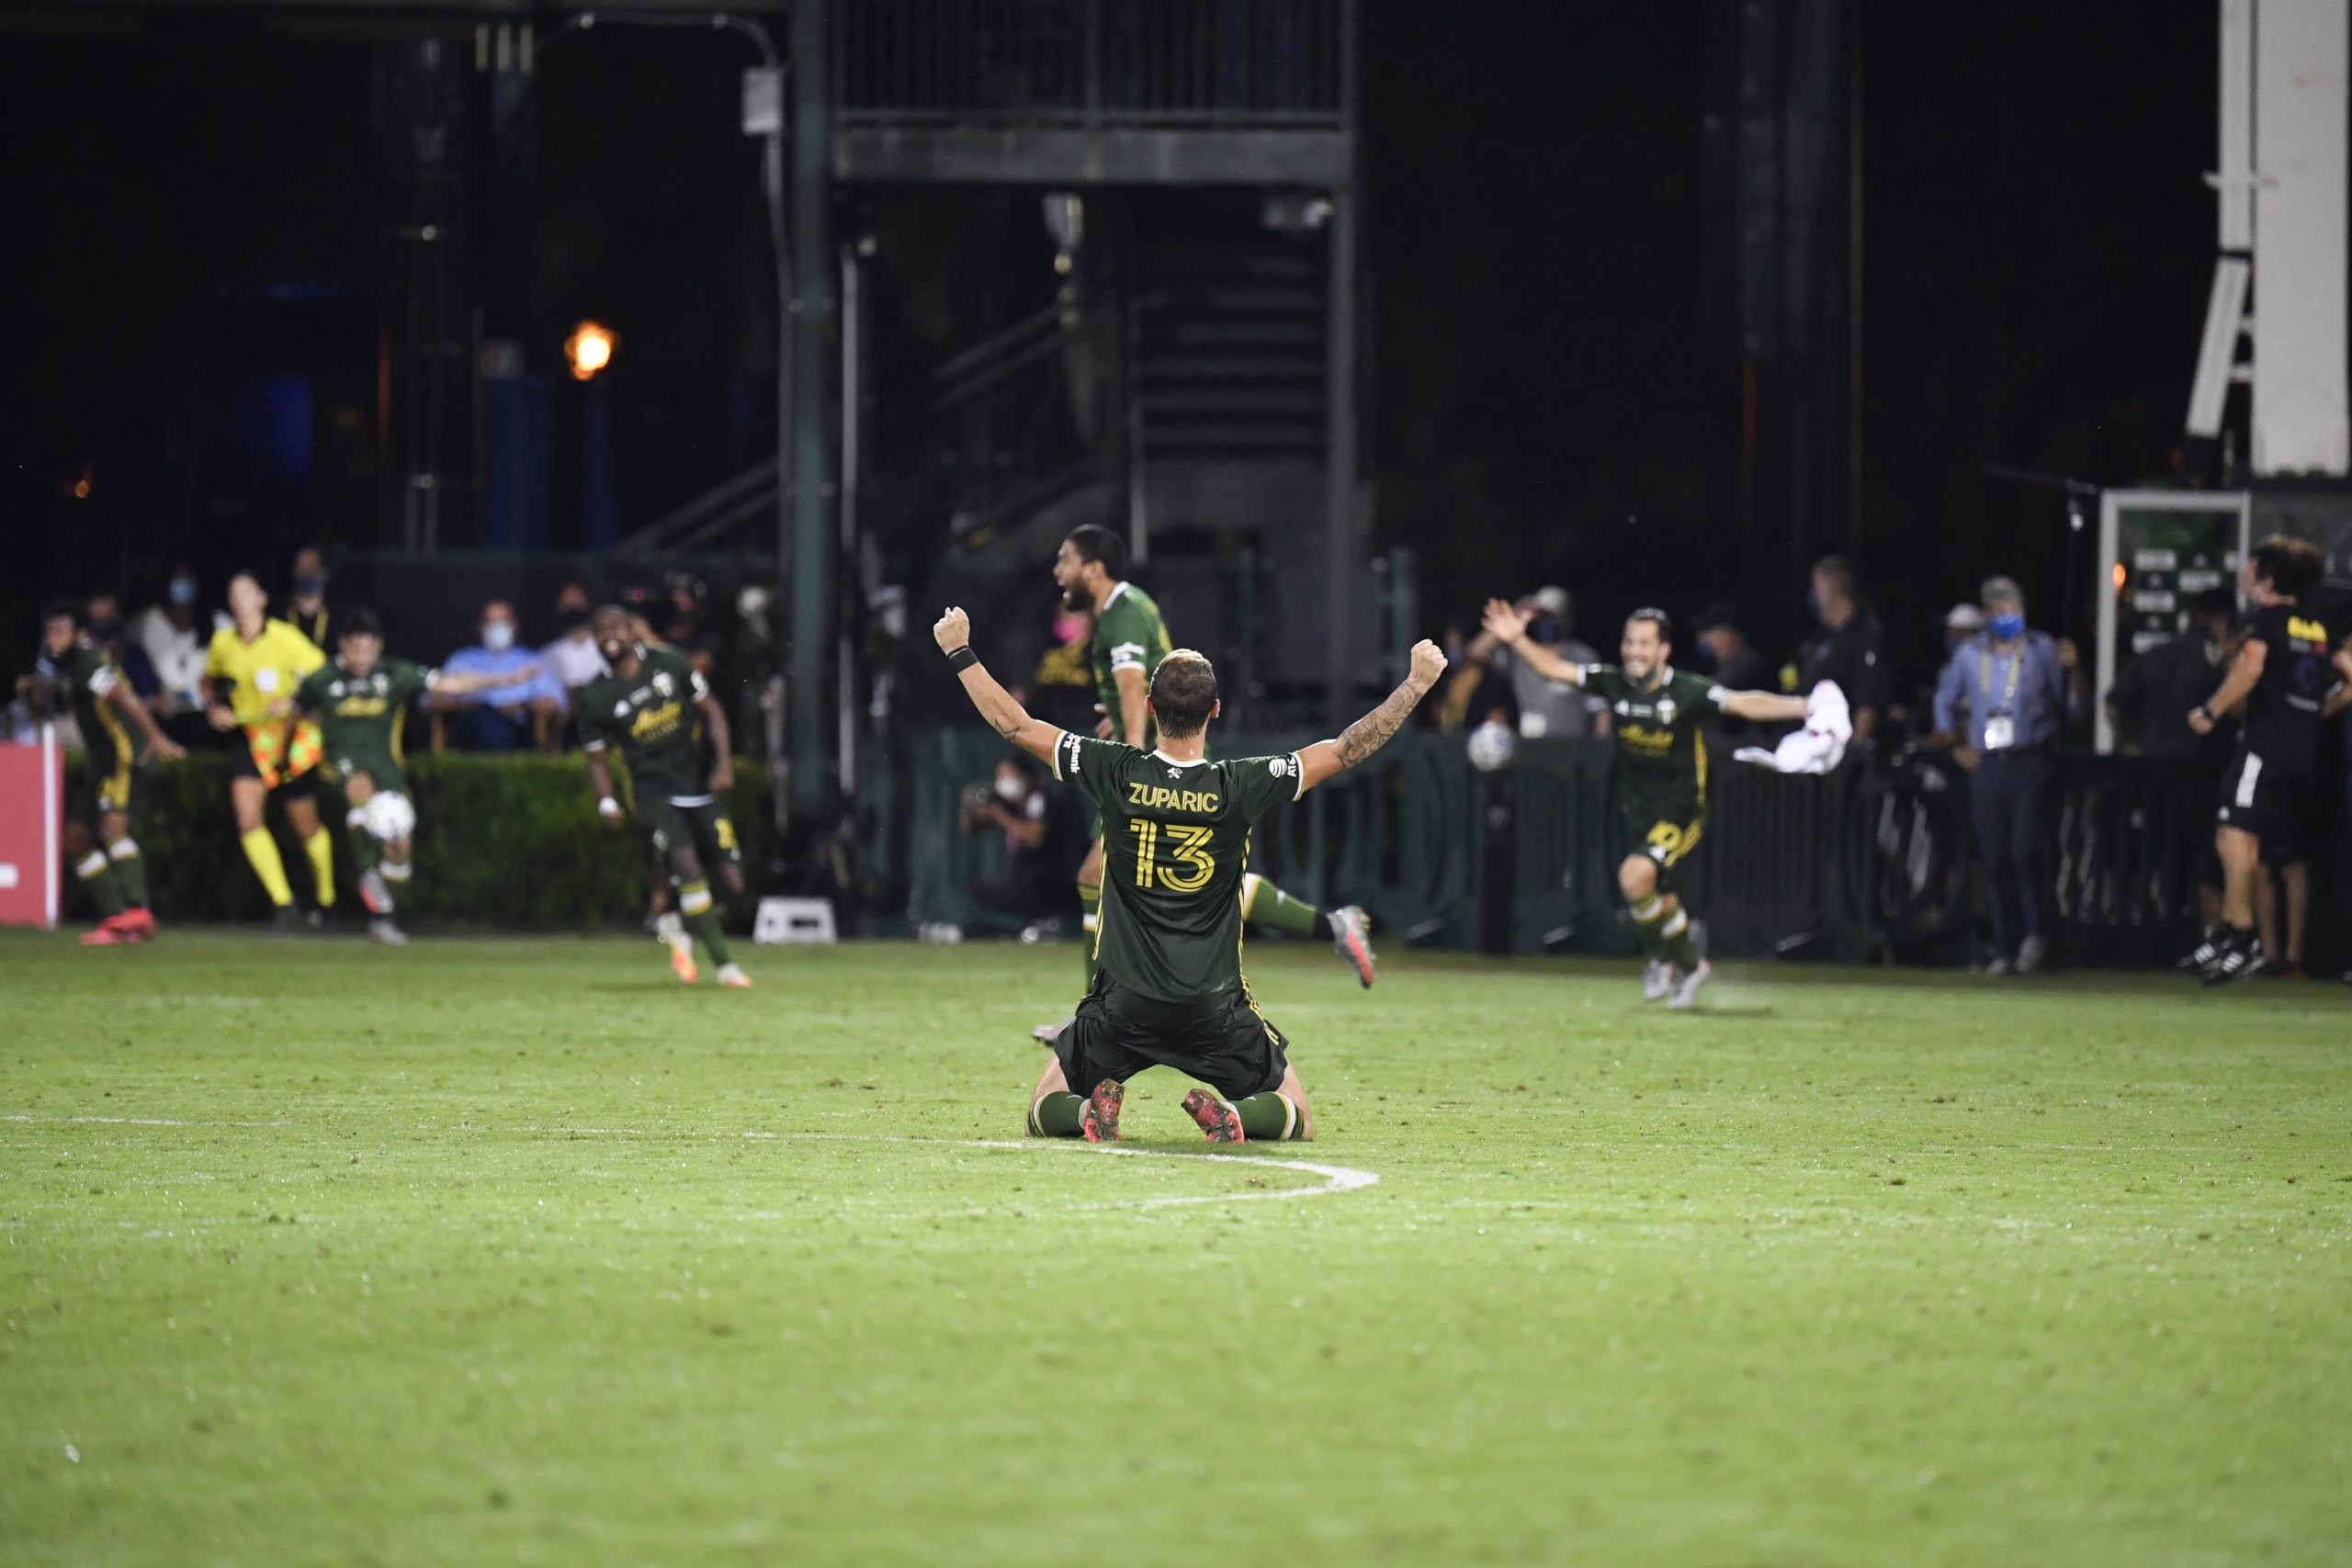 MLS: MLS IS BACK Final-Orlando City SC at Portland Timbers Aug 11, 2020; Orlando, FL, Orlando, FL, USA;  Portland Timbers defender Dario Zuparic (13) celebrates after defeating Orlando City at ESPN Wide World of Sports Complex. Mandatory Credit: Douglas DeFelice-USA TODAY Sports Douglas DeFelice